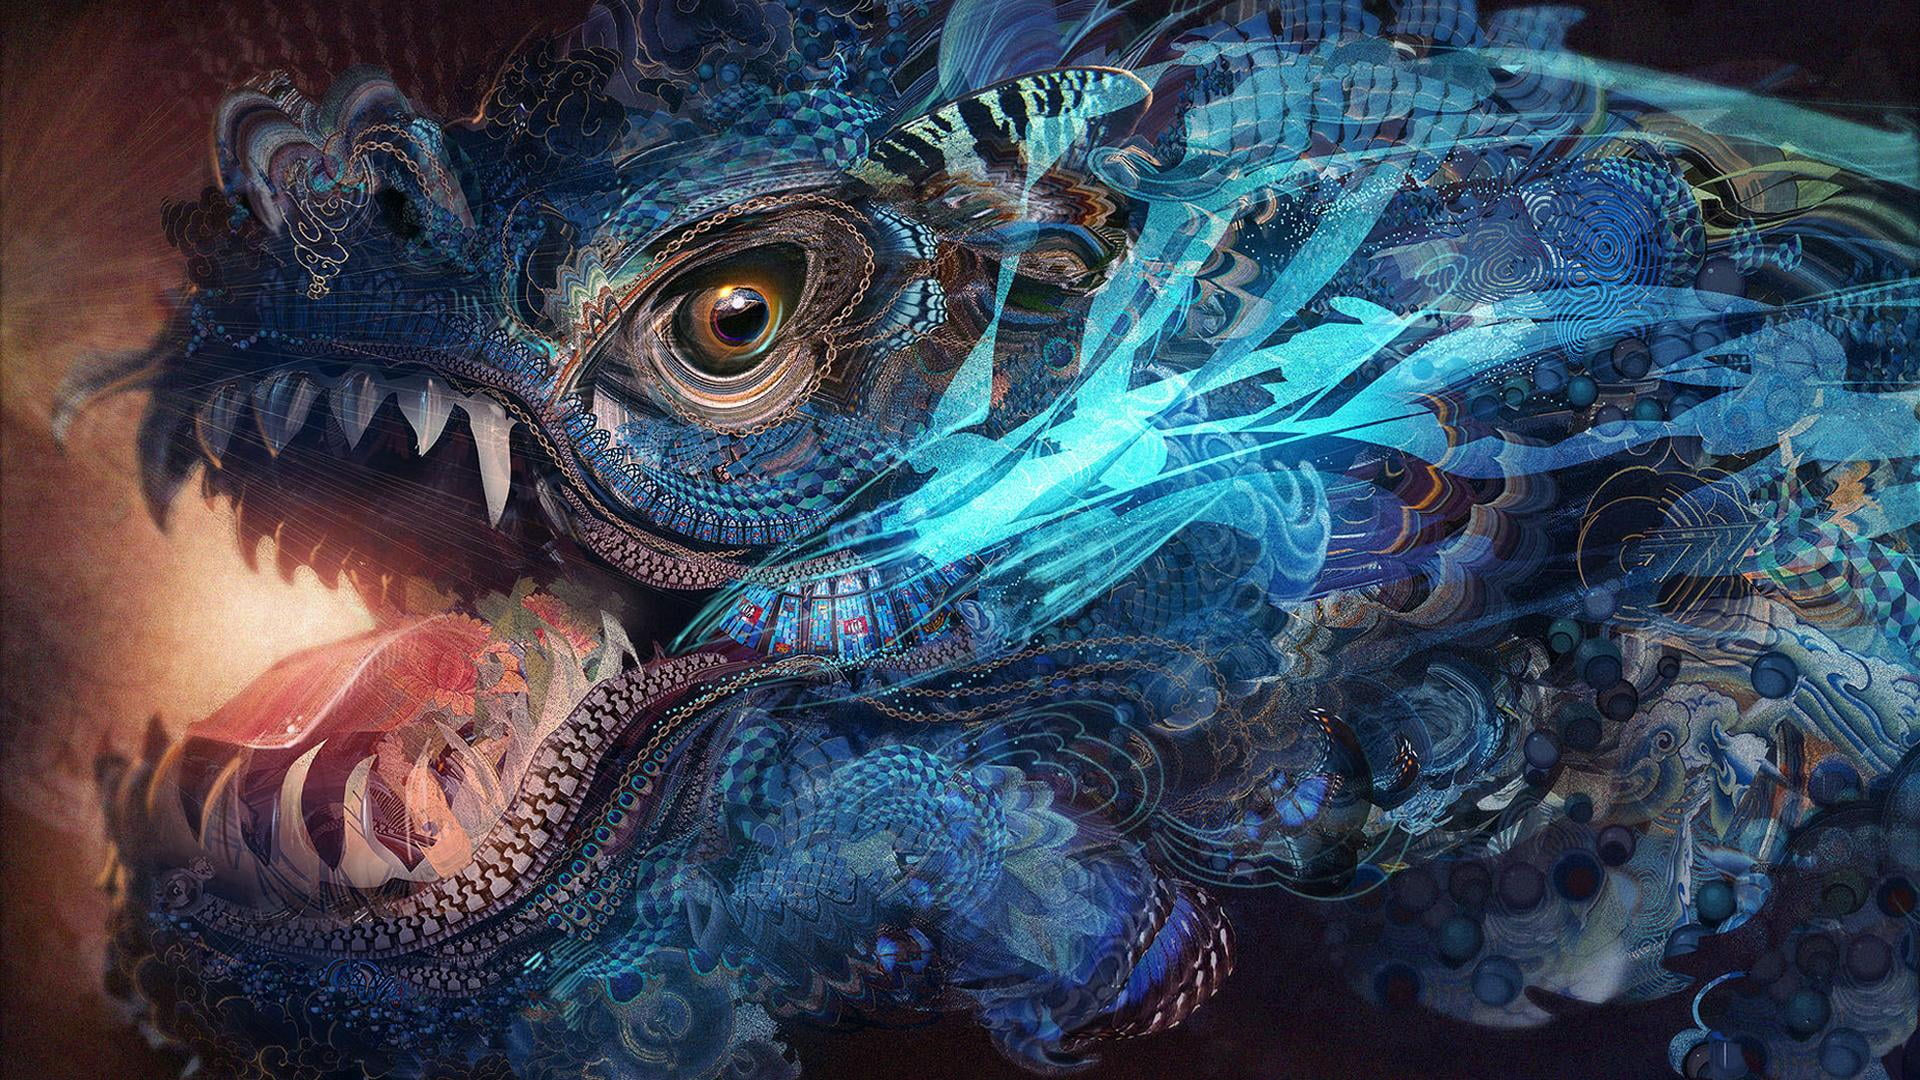 Psychedelic wallpaper, dragon, abstract, trippy, fractal, art and craft